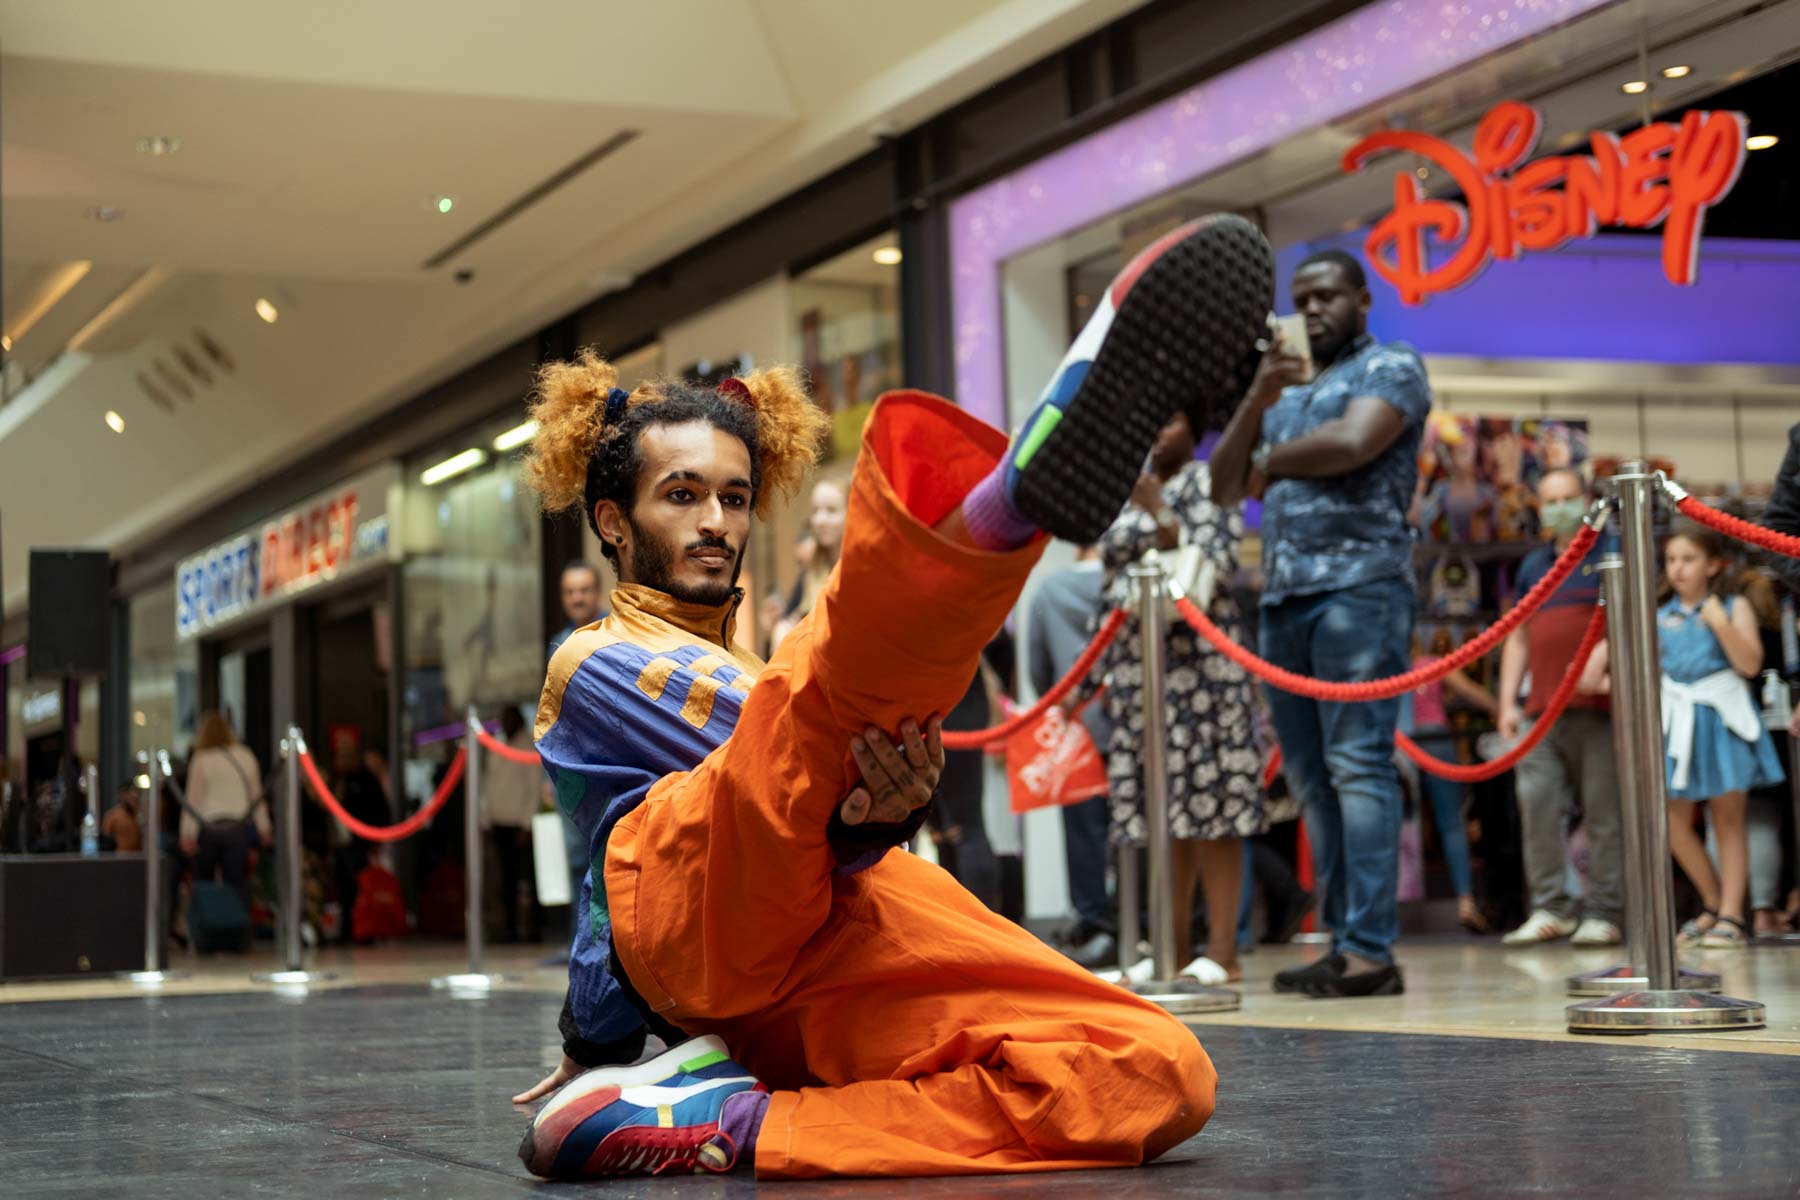 Fierce Flow the show at Bullring during Birmingham Weekender 2021, a male dancer is performing Vogue